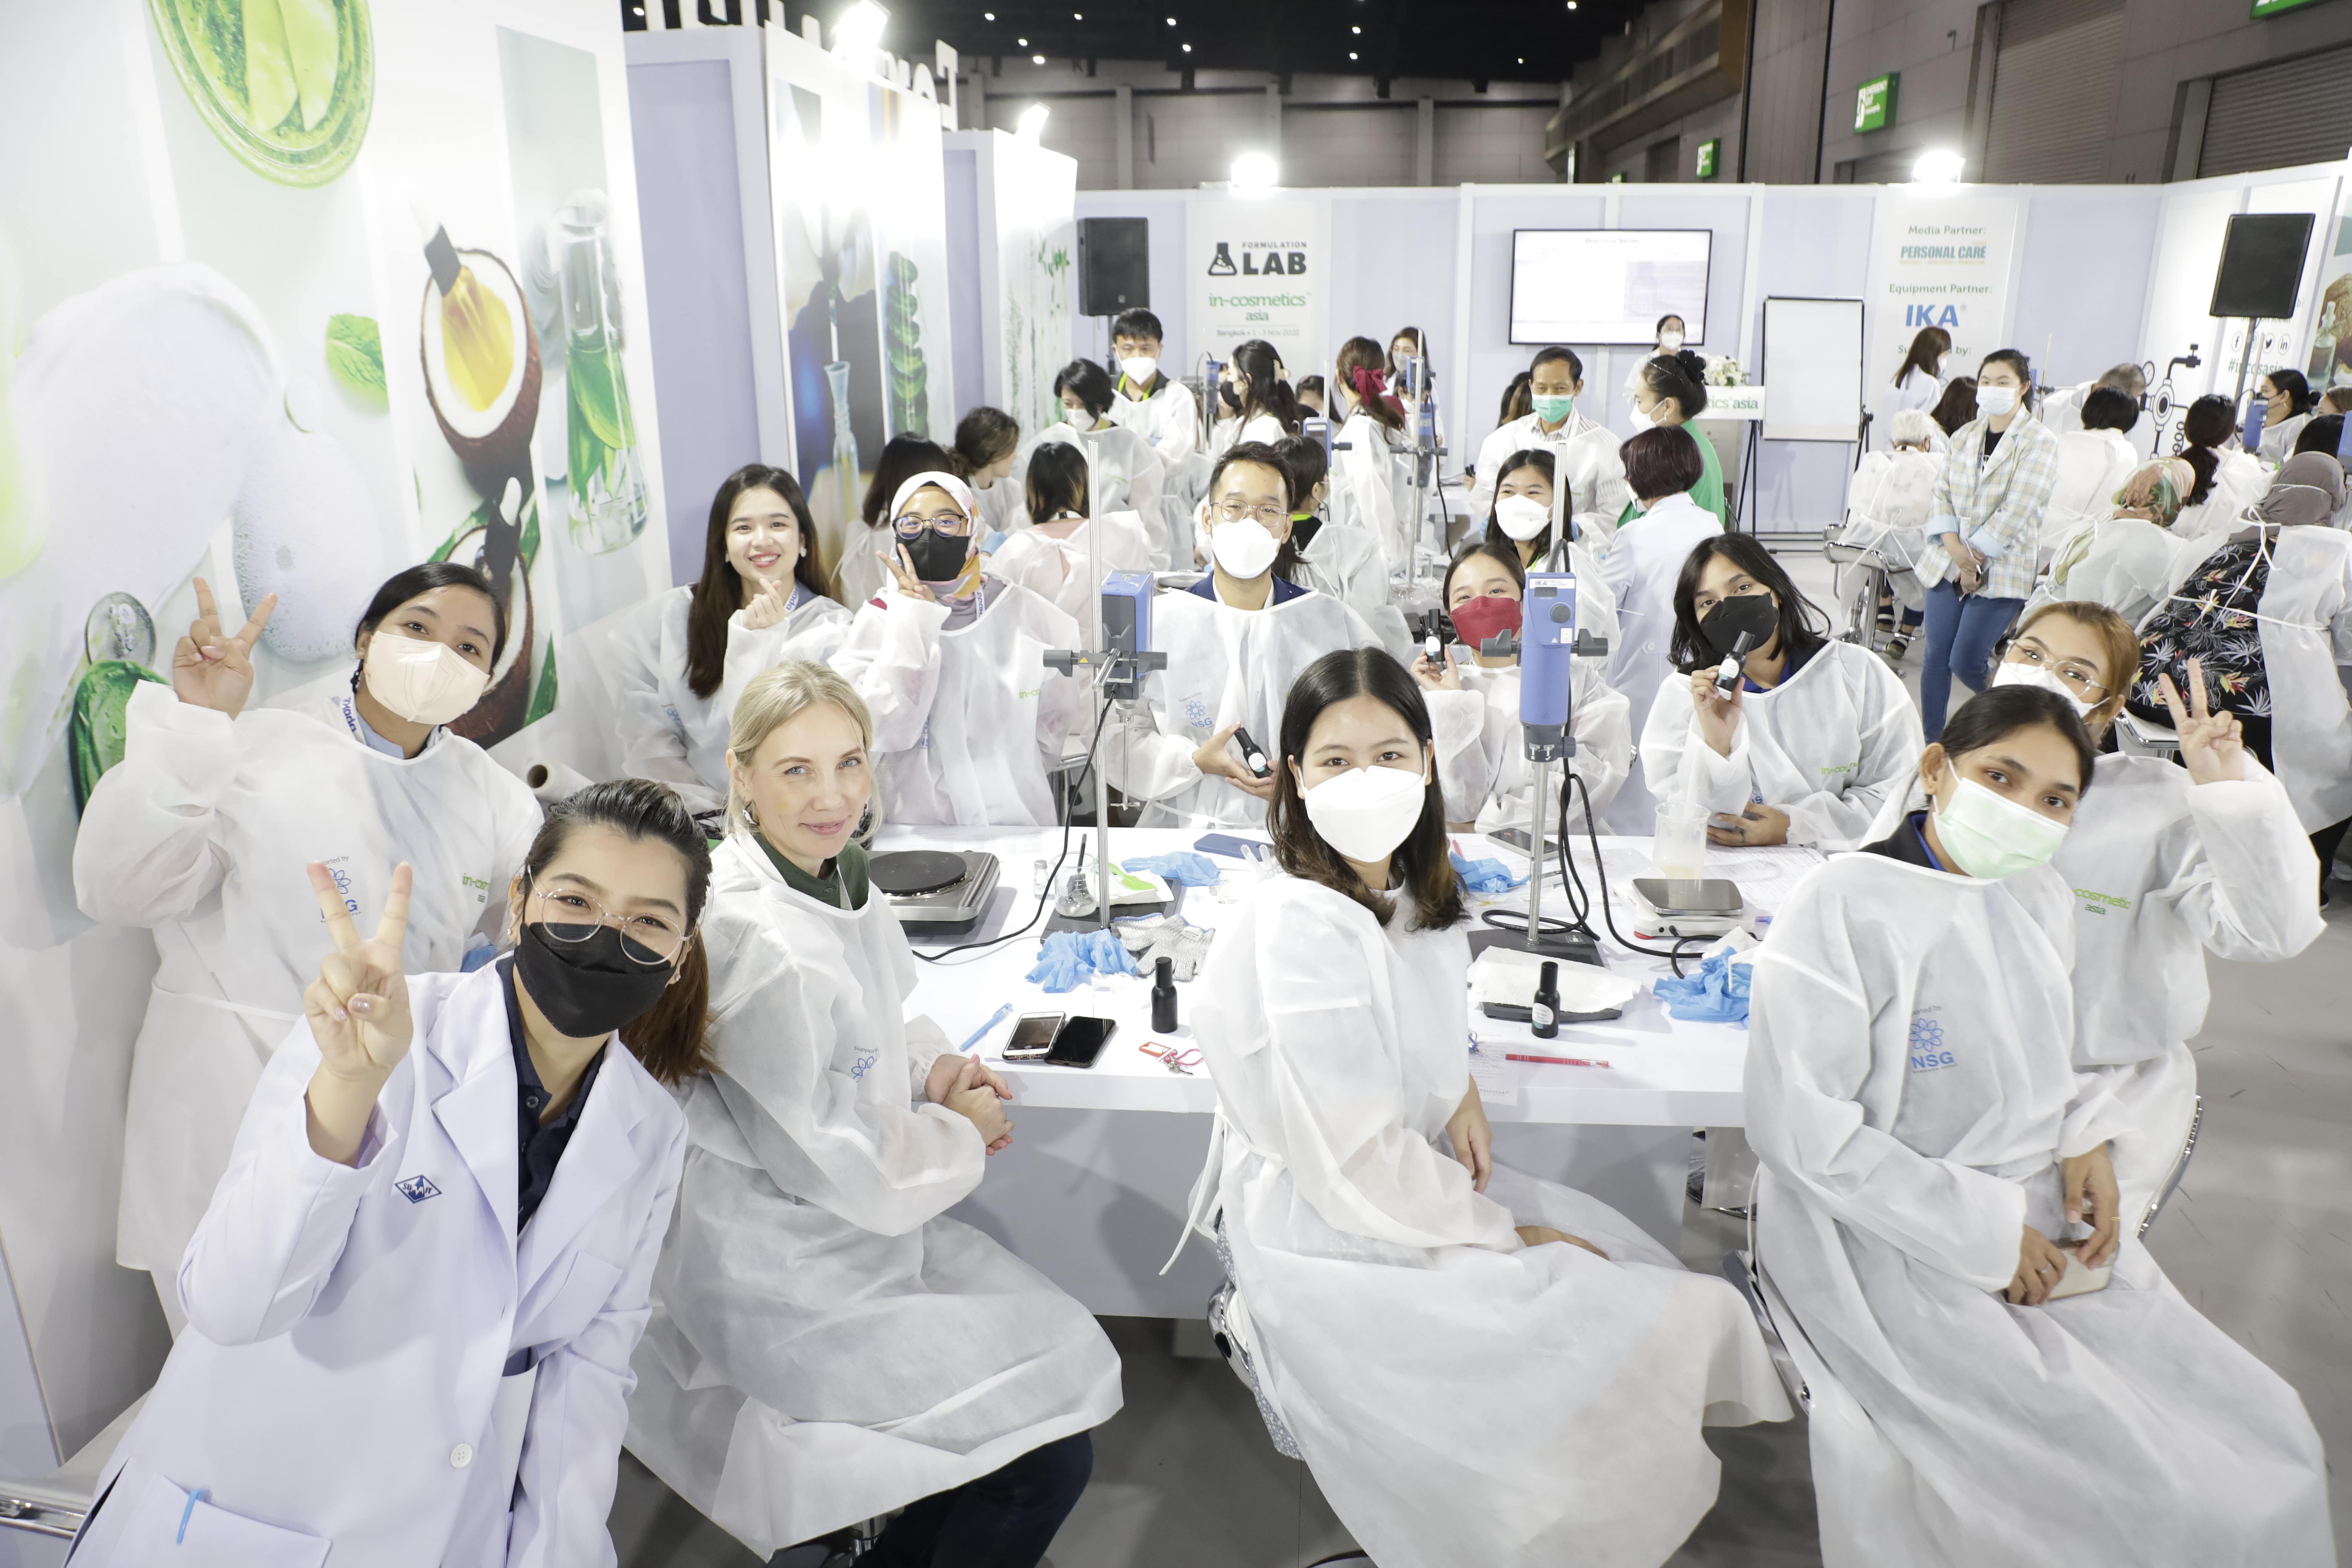 A triumphant return: in-cosmetics Asia is back with highest satisfaction scores in the show’s 13-year history